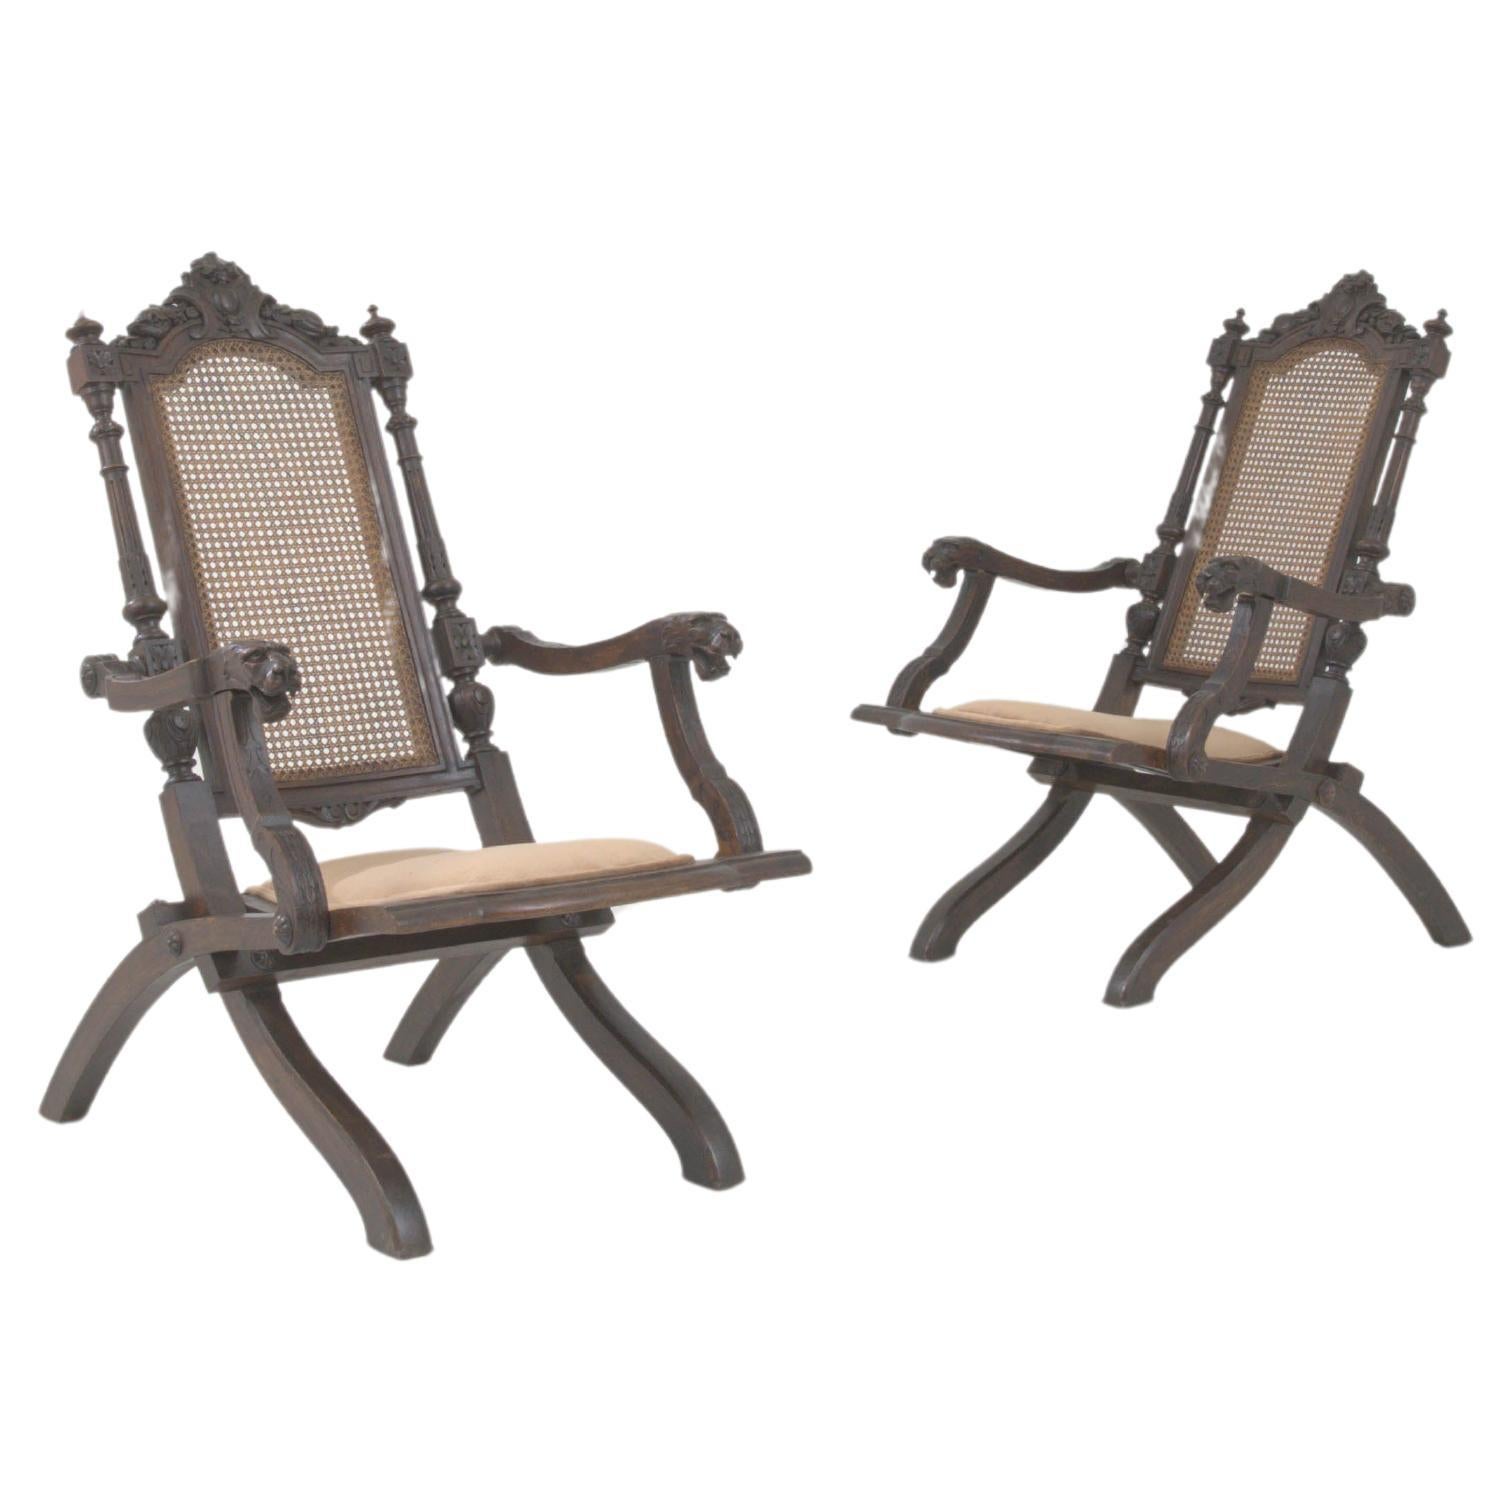 1900s French Wooden Folding Armchairs with Upholstered Seats, a Pair For Sale